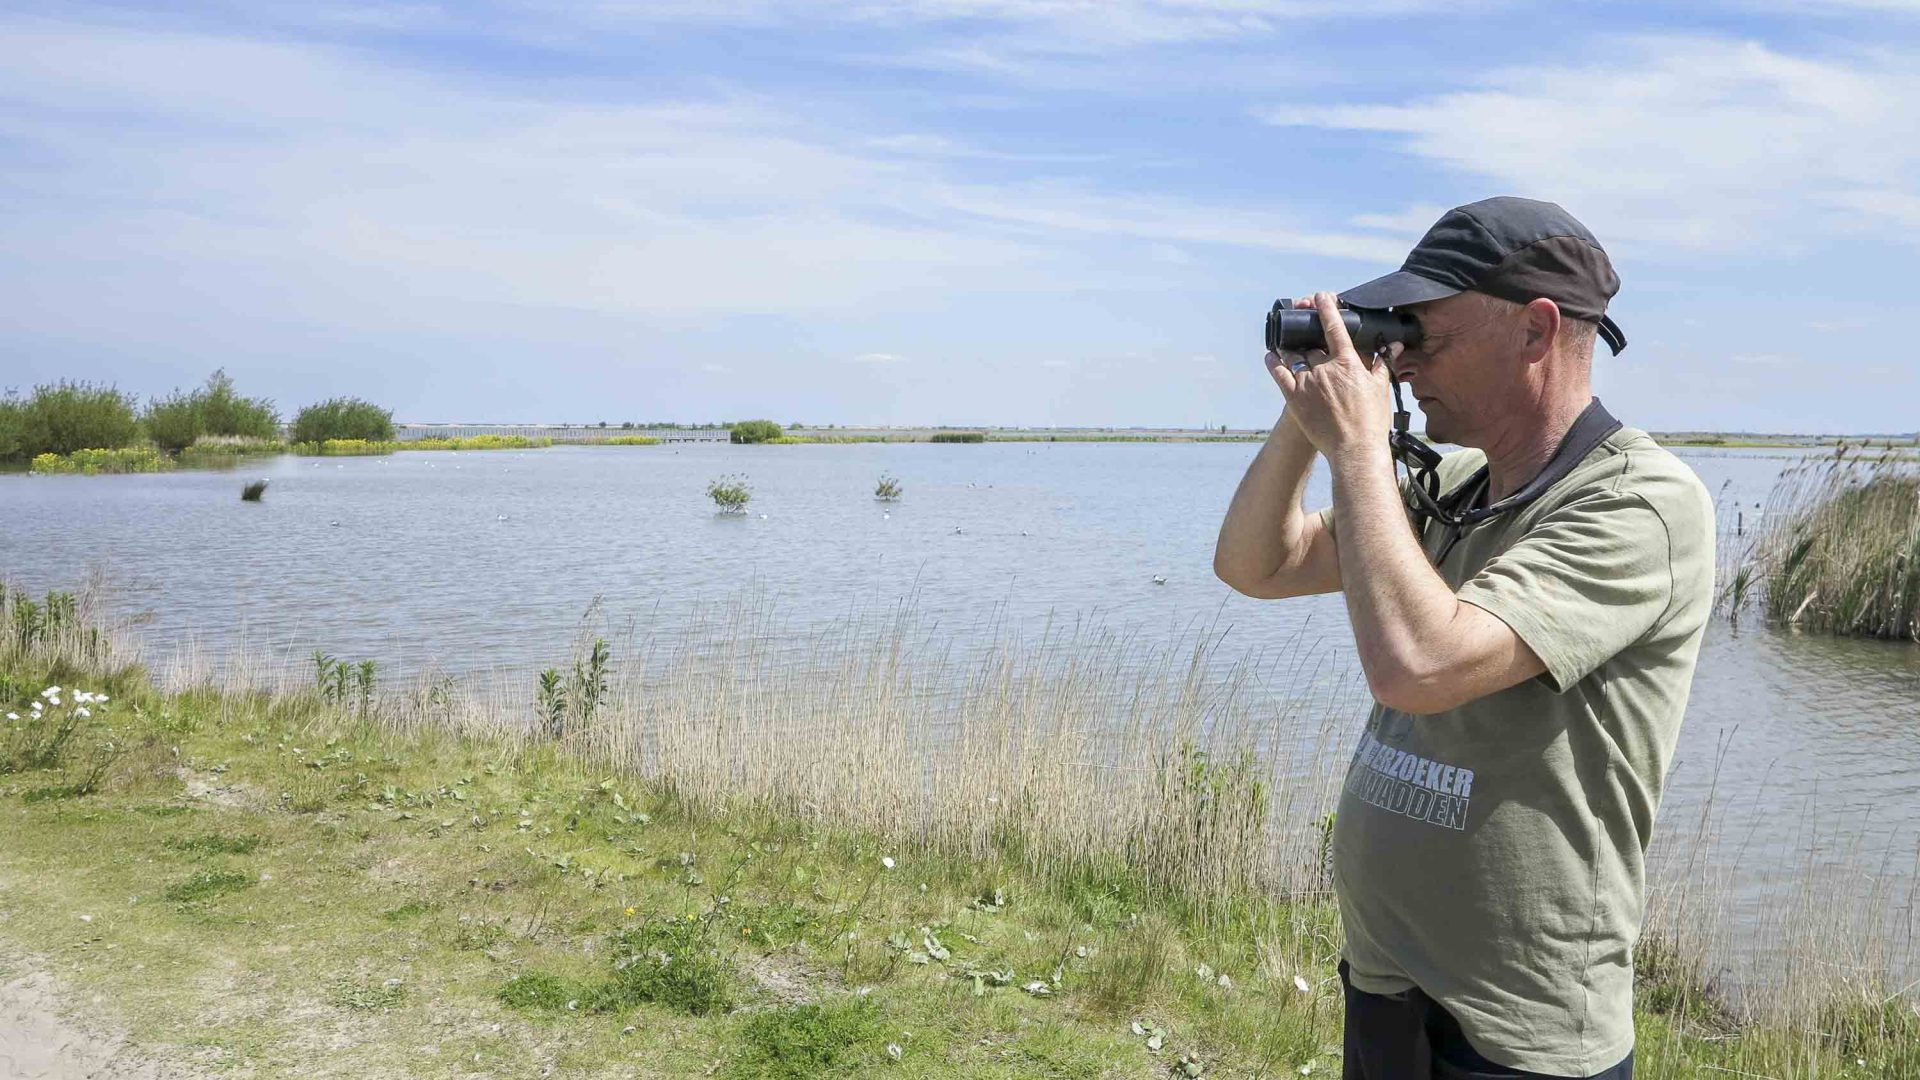 A man uses binoculars to look out for birds.